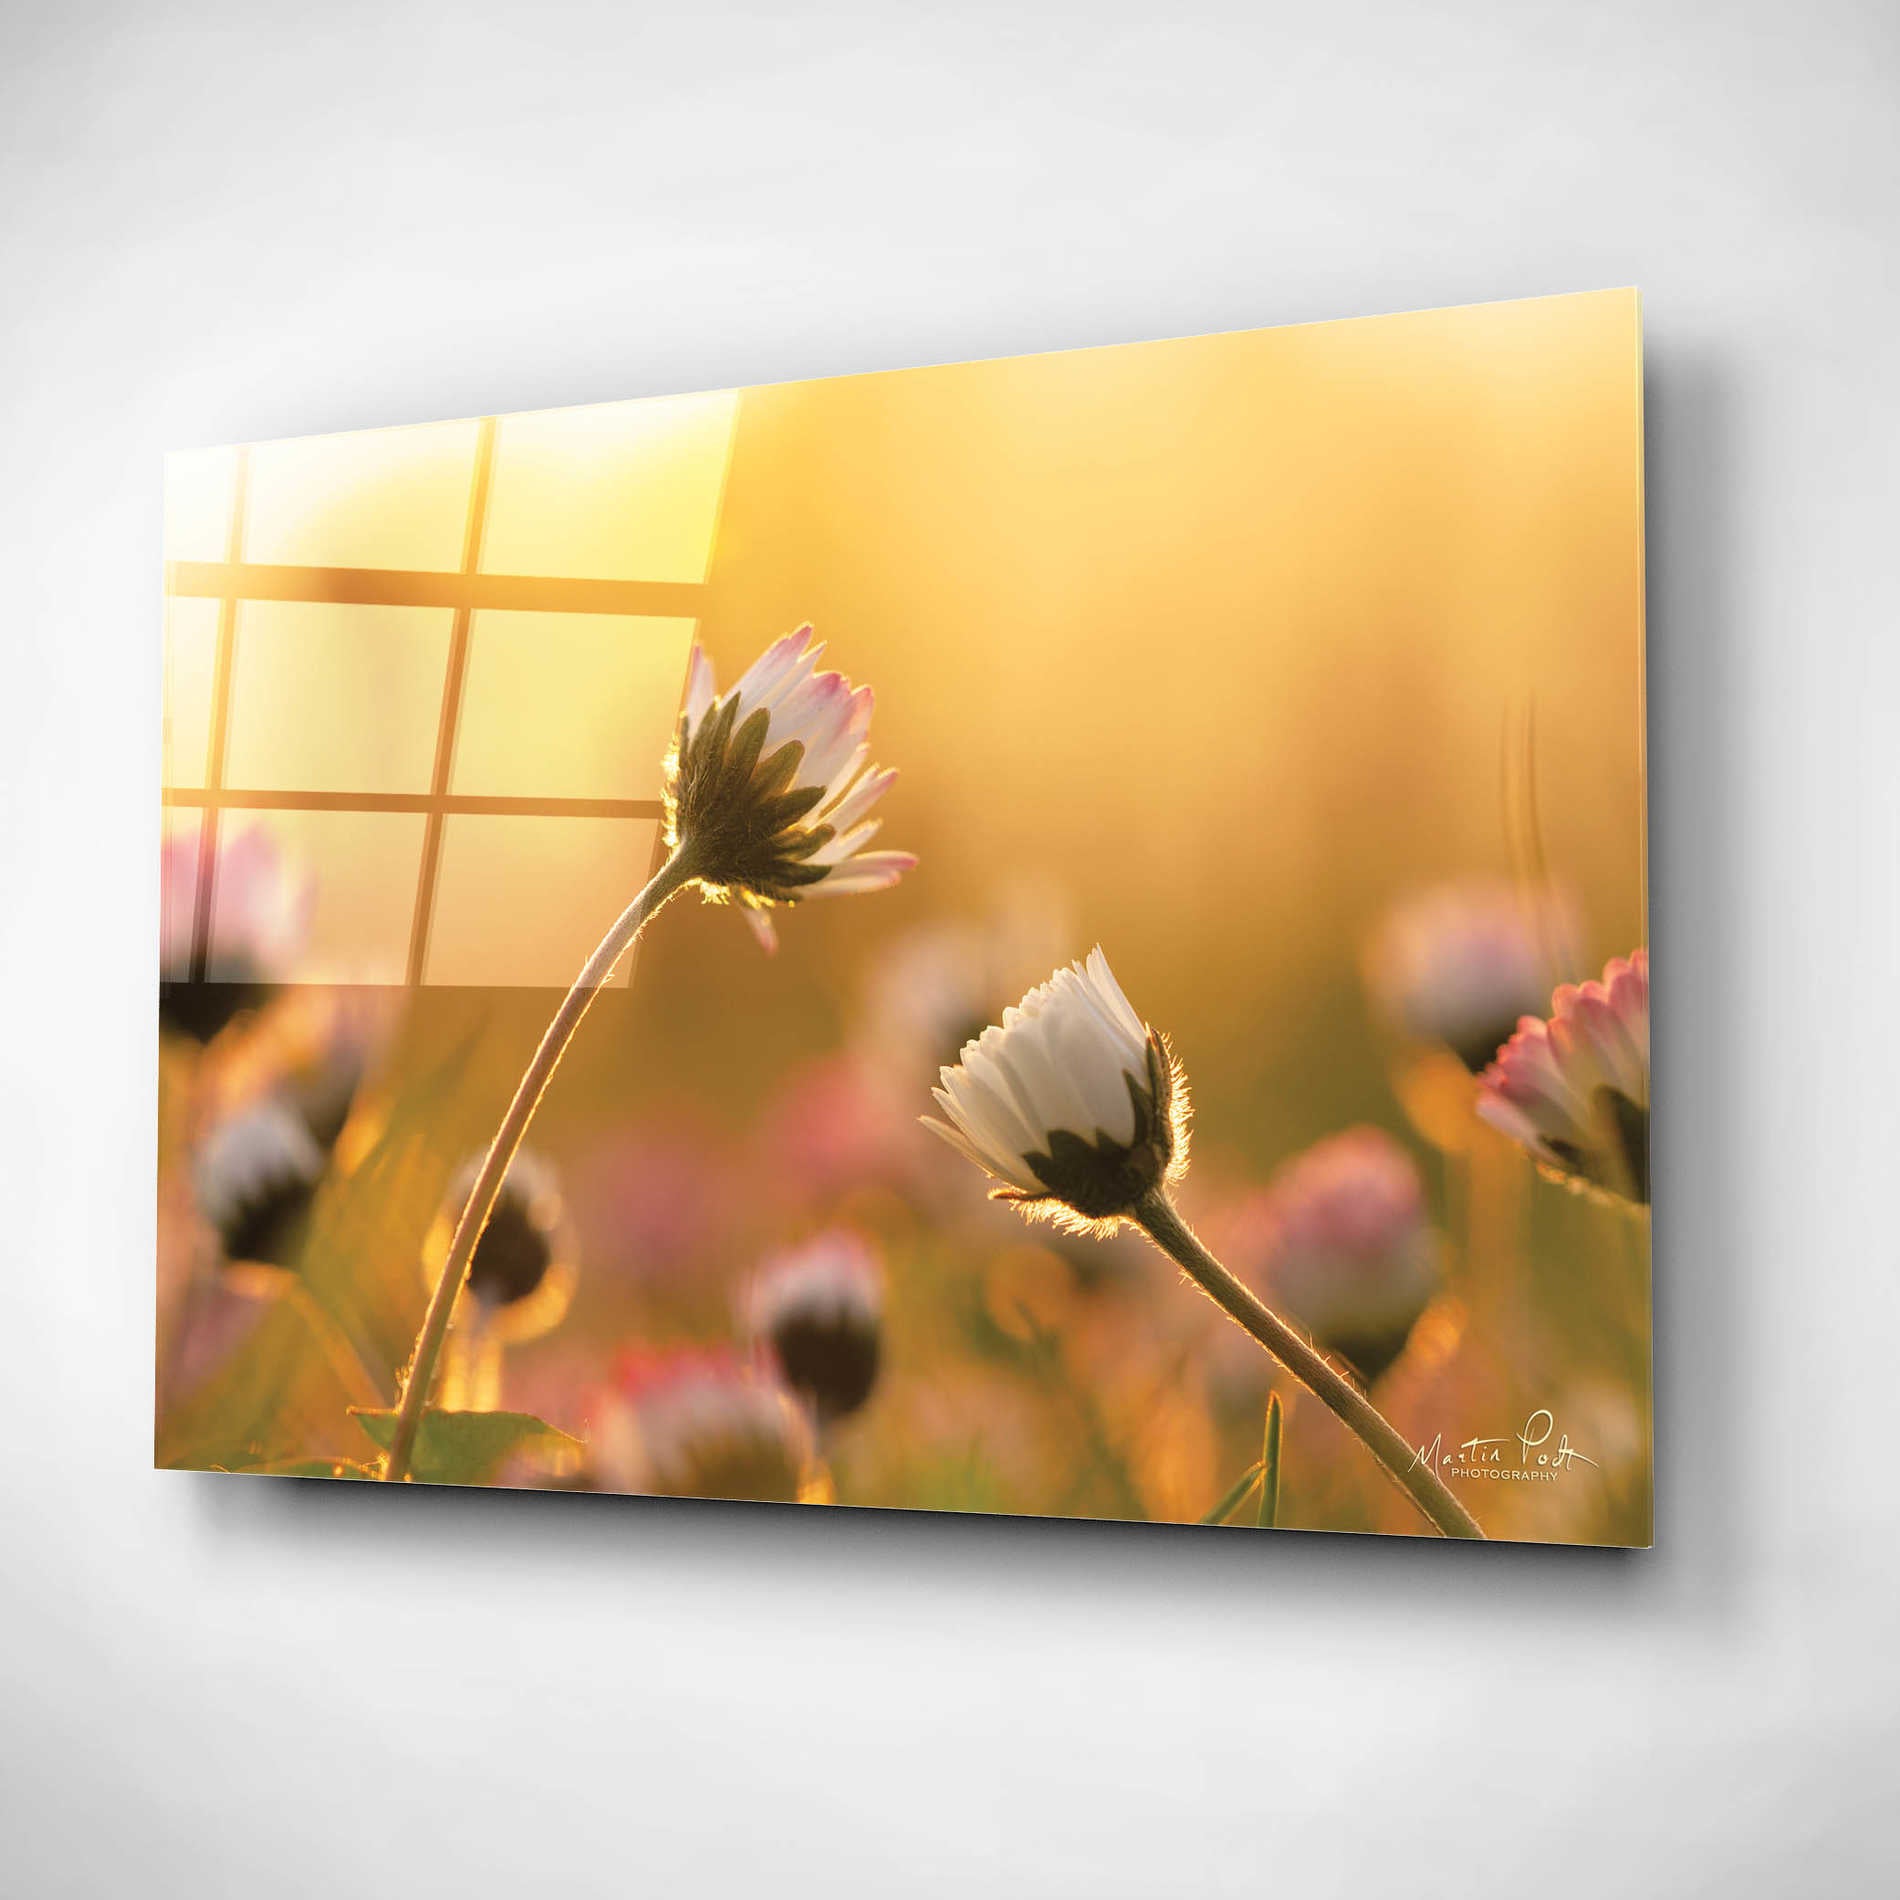 Epic Art 'Daisies' by Martin Podt, Acrylic Glass Wall Art,16x12